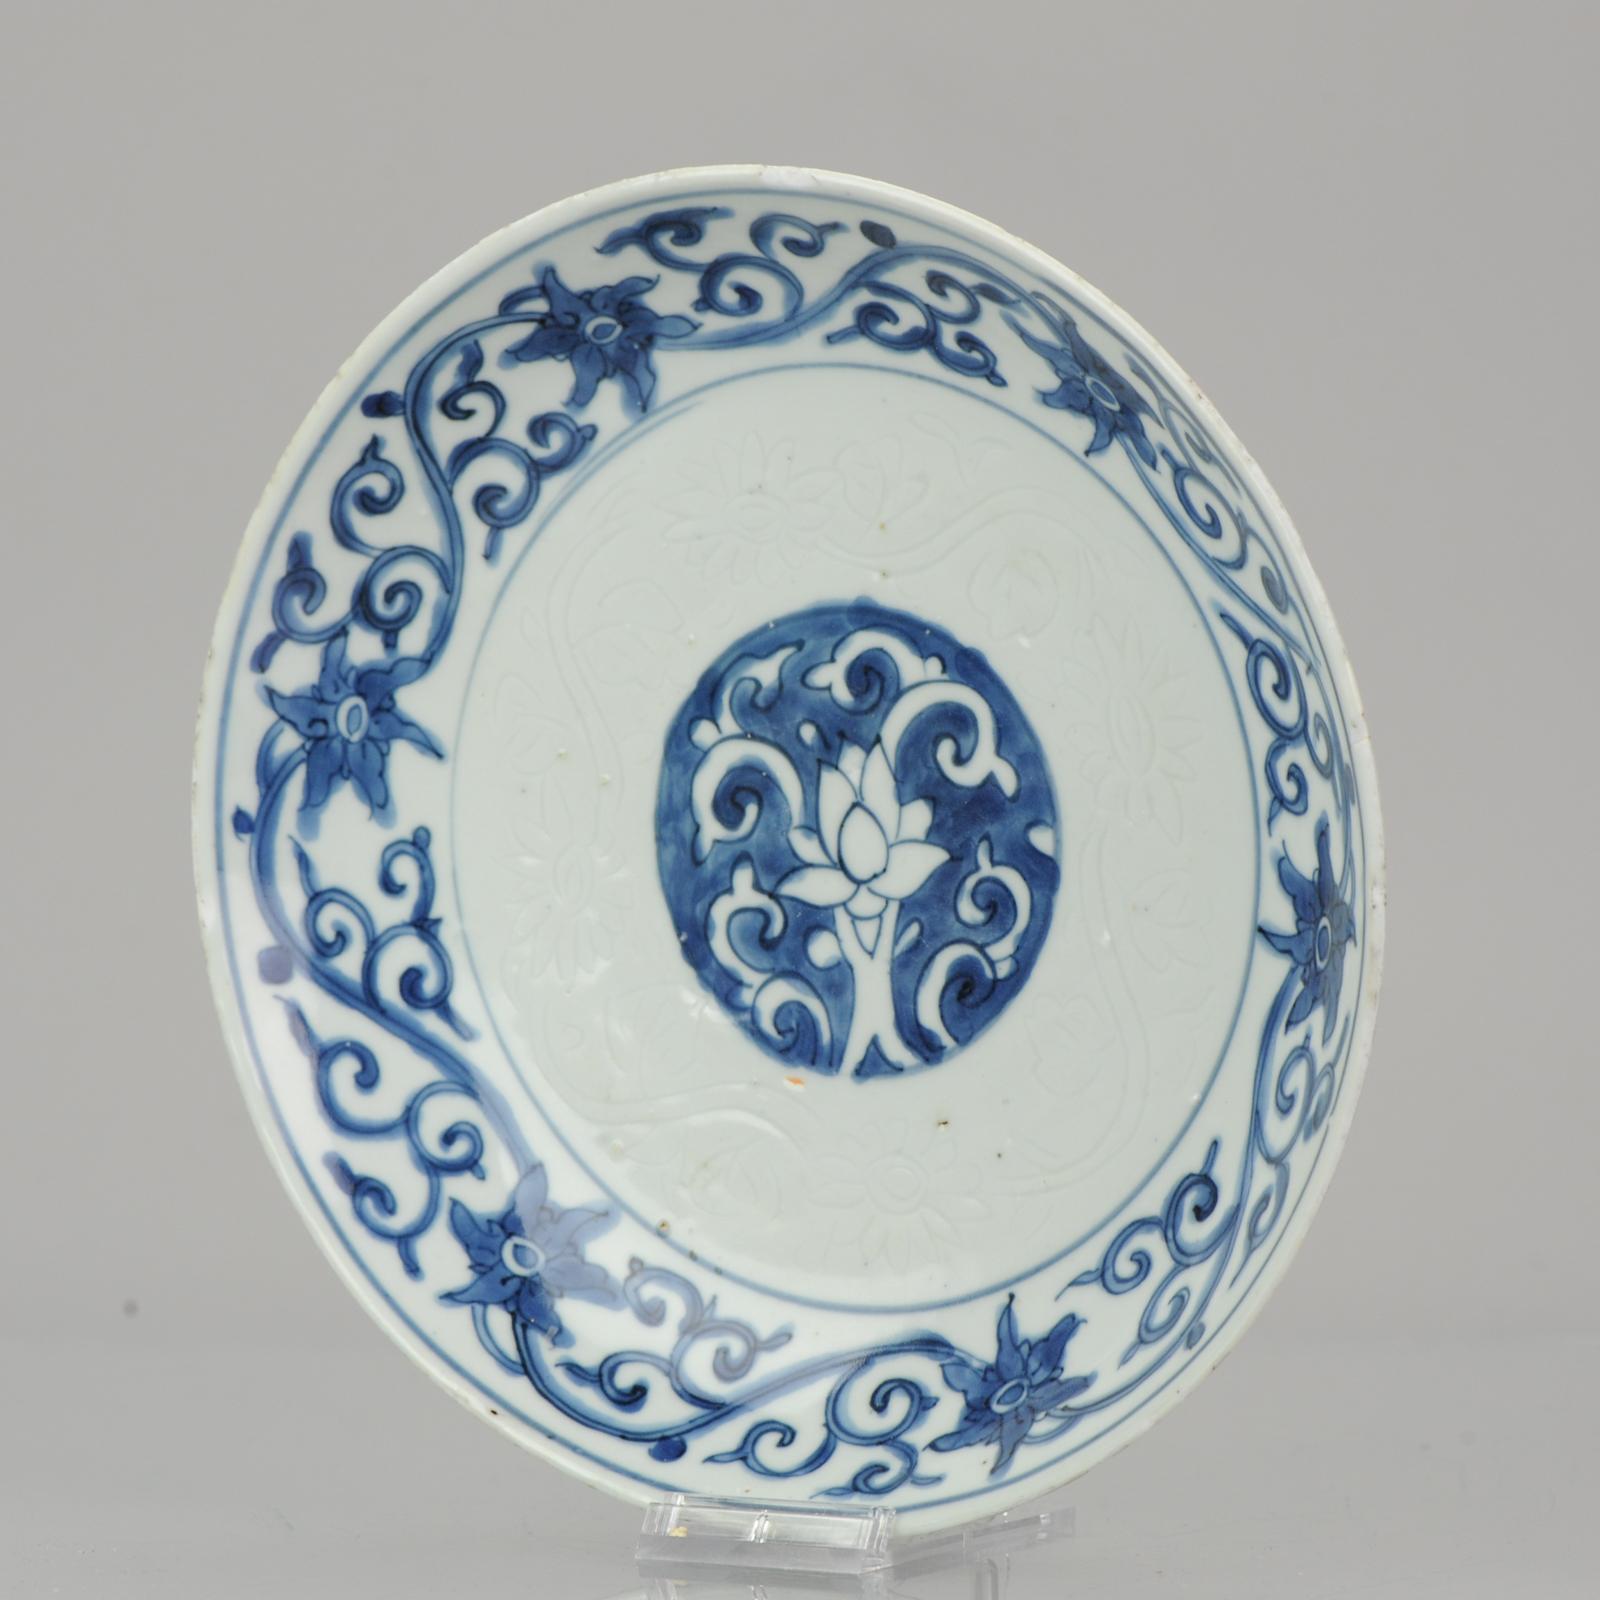 Antique Chinese Porcelain Lotus Ming 1600-1640 Tianqi Chongzhen Anhua Engraving In Good Condition For Sale In Amsterdam, Noord Holland